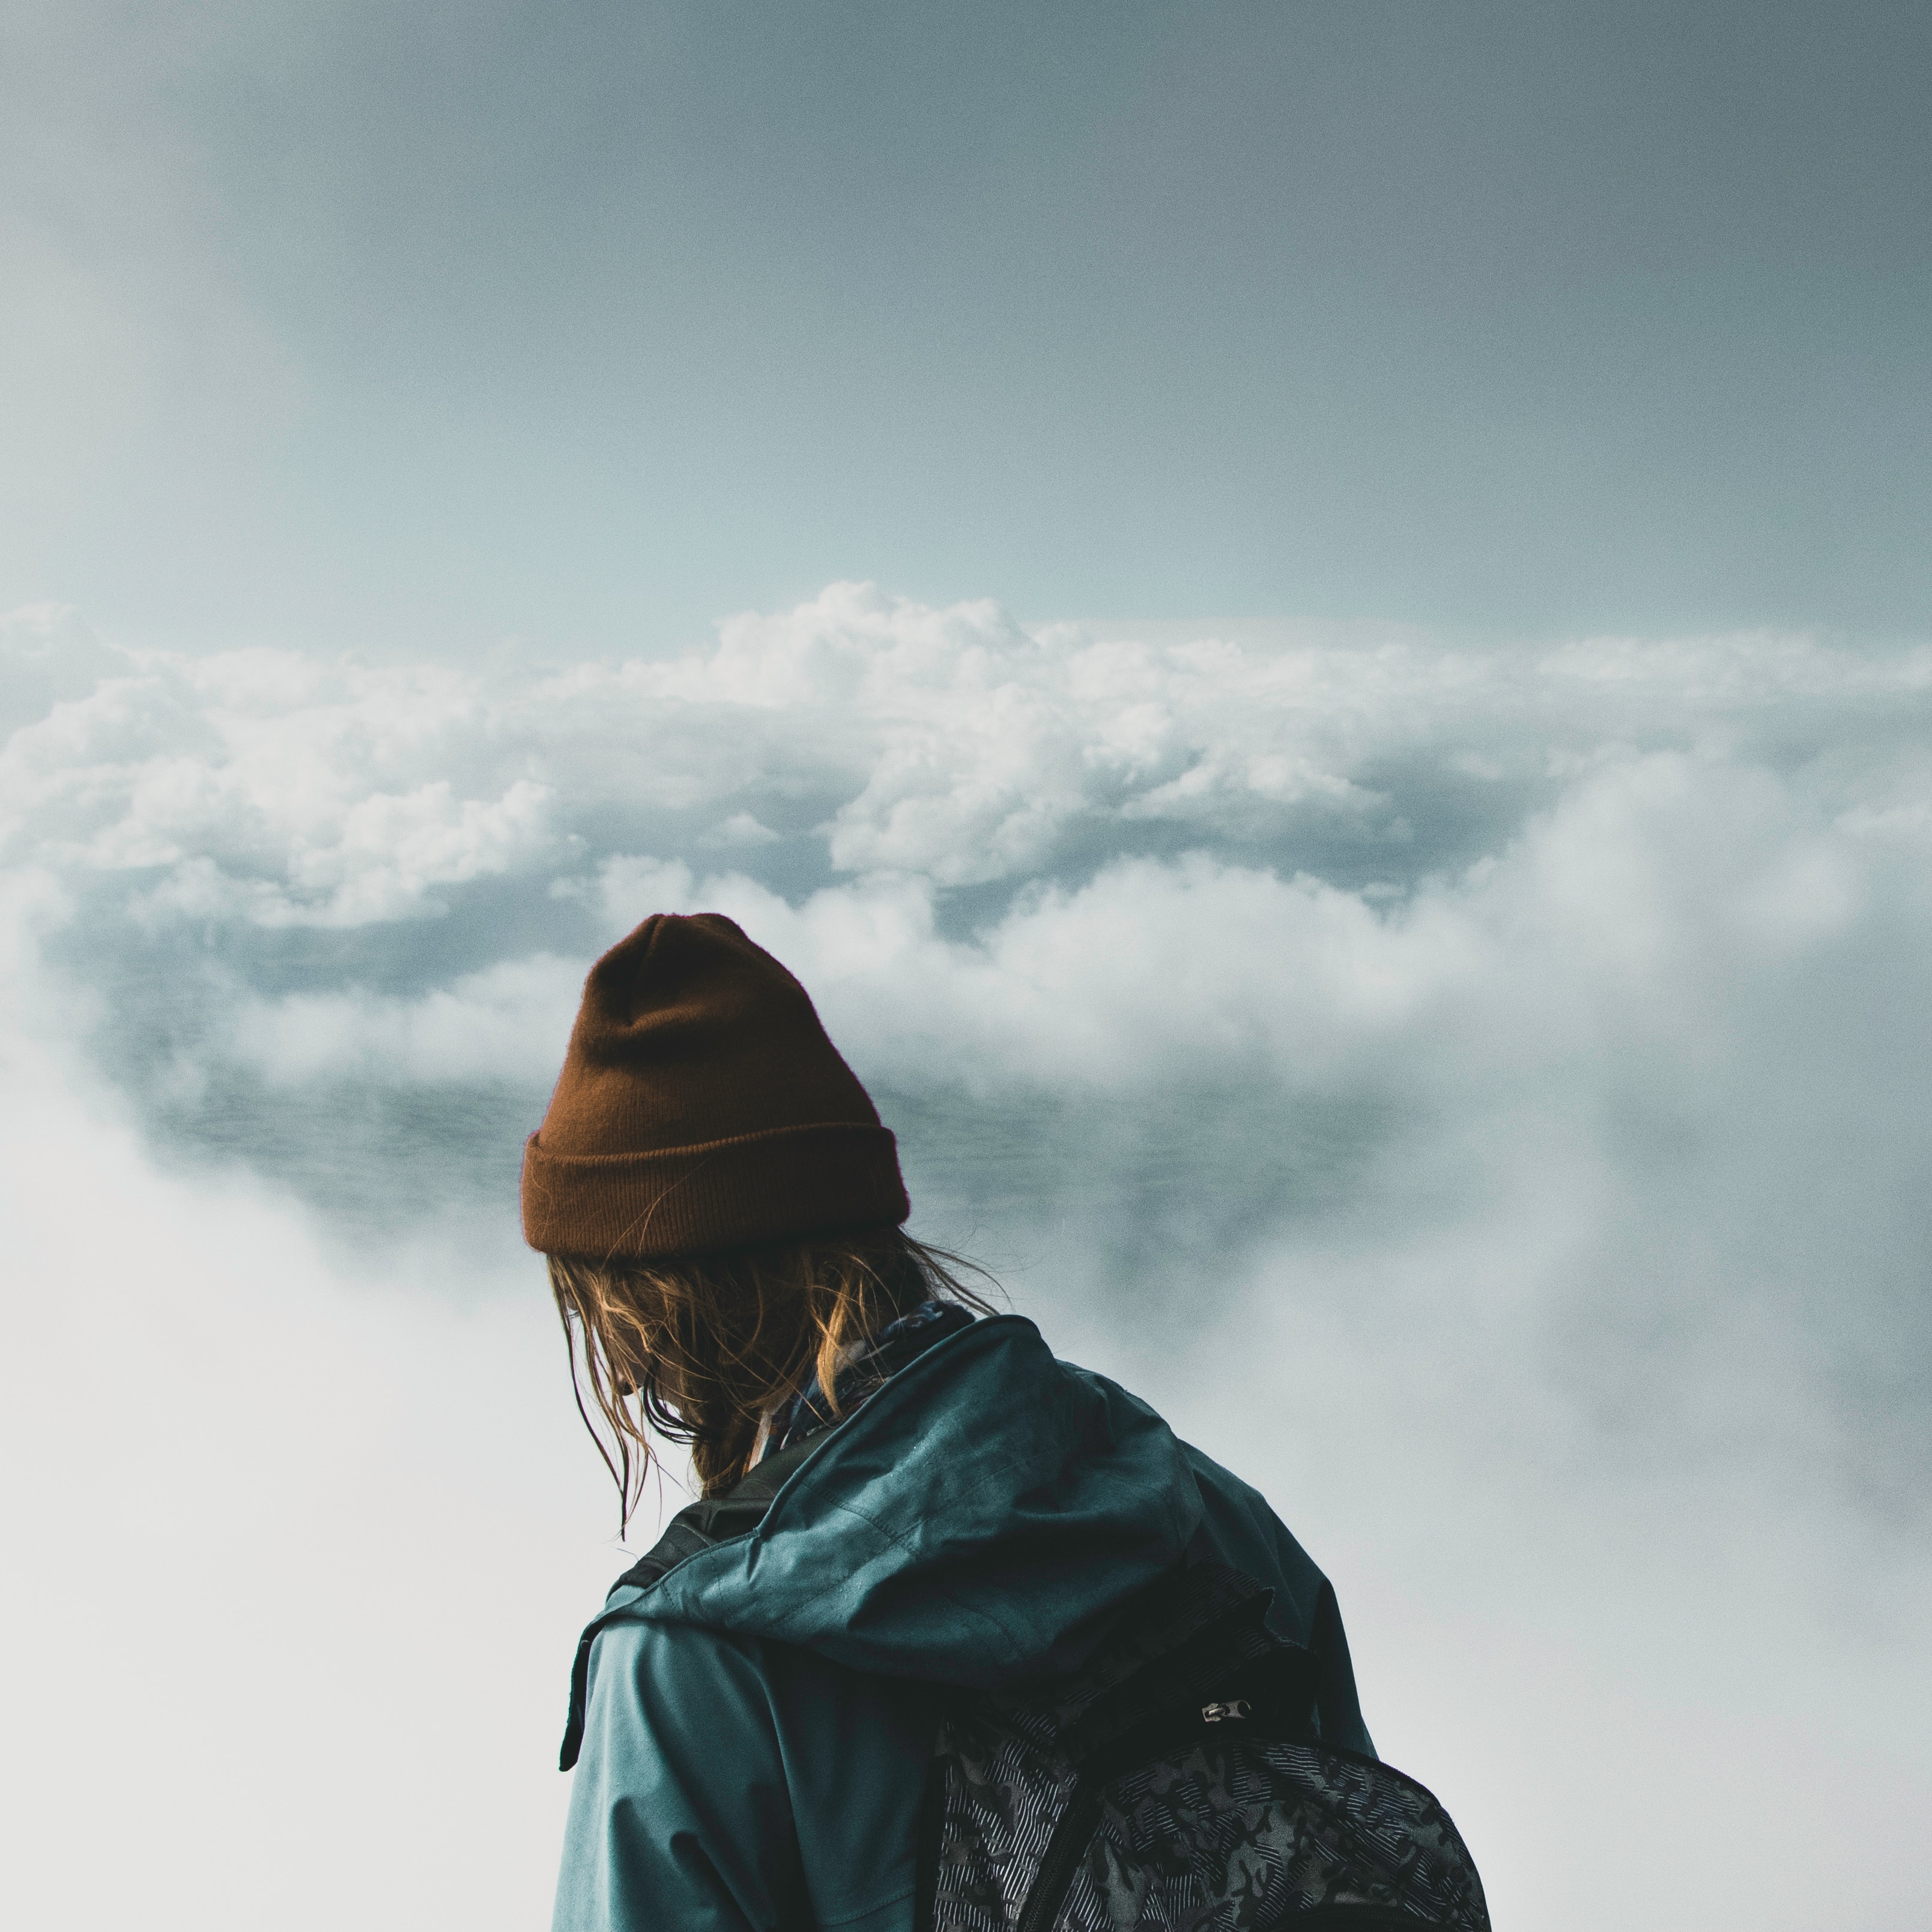 clouds, miscellanea, miscellaneous, overview, review, height, view, human, person